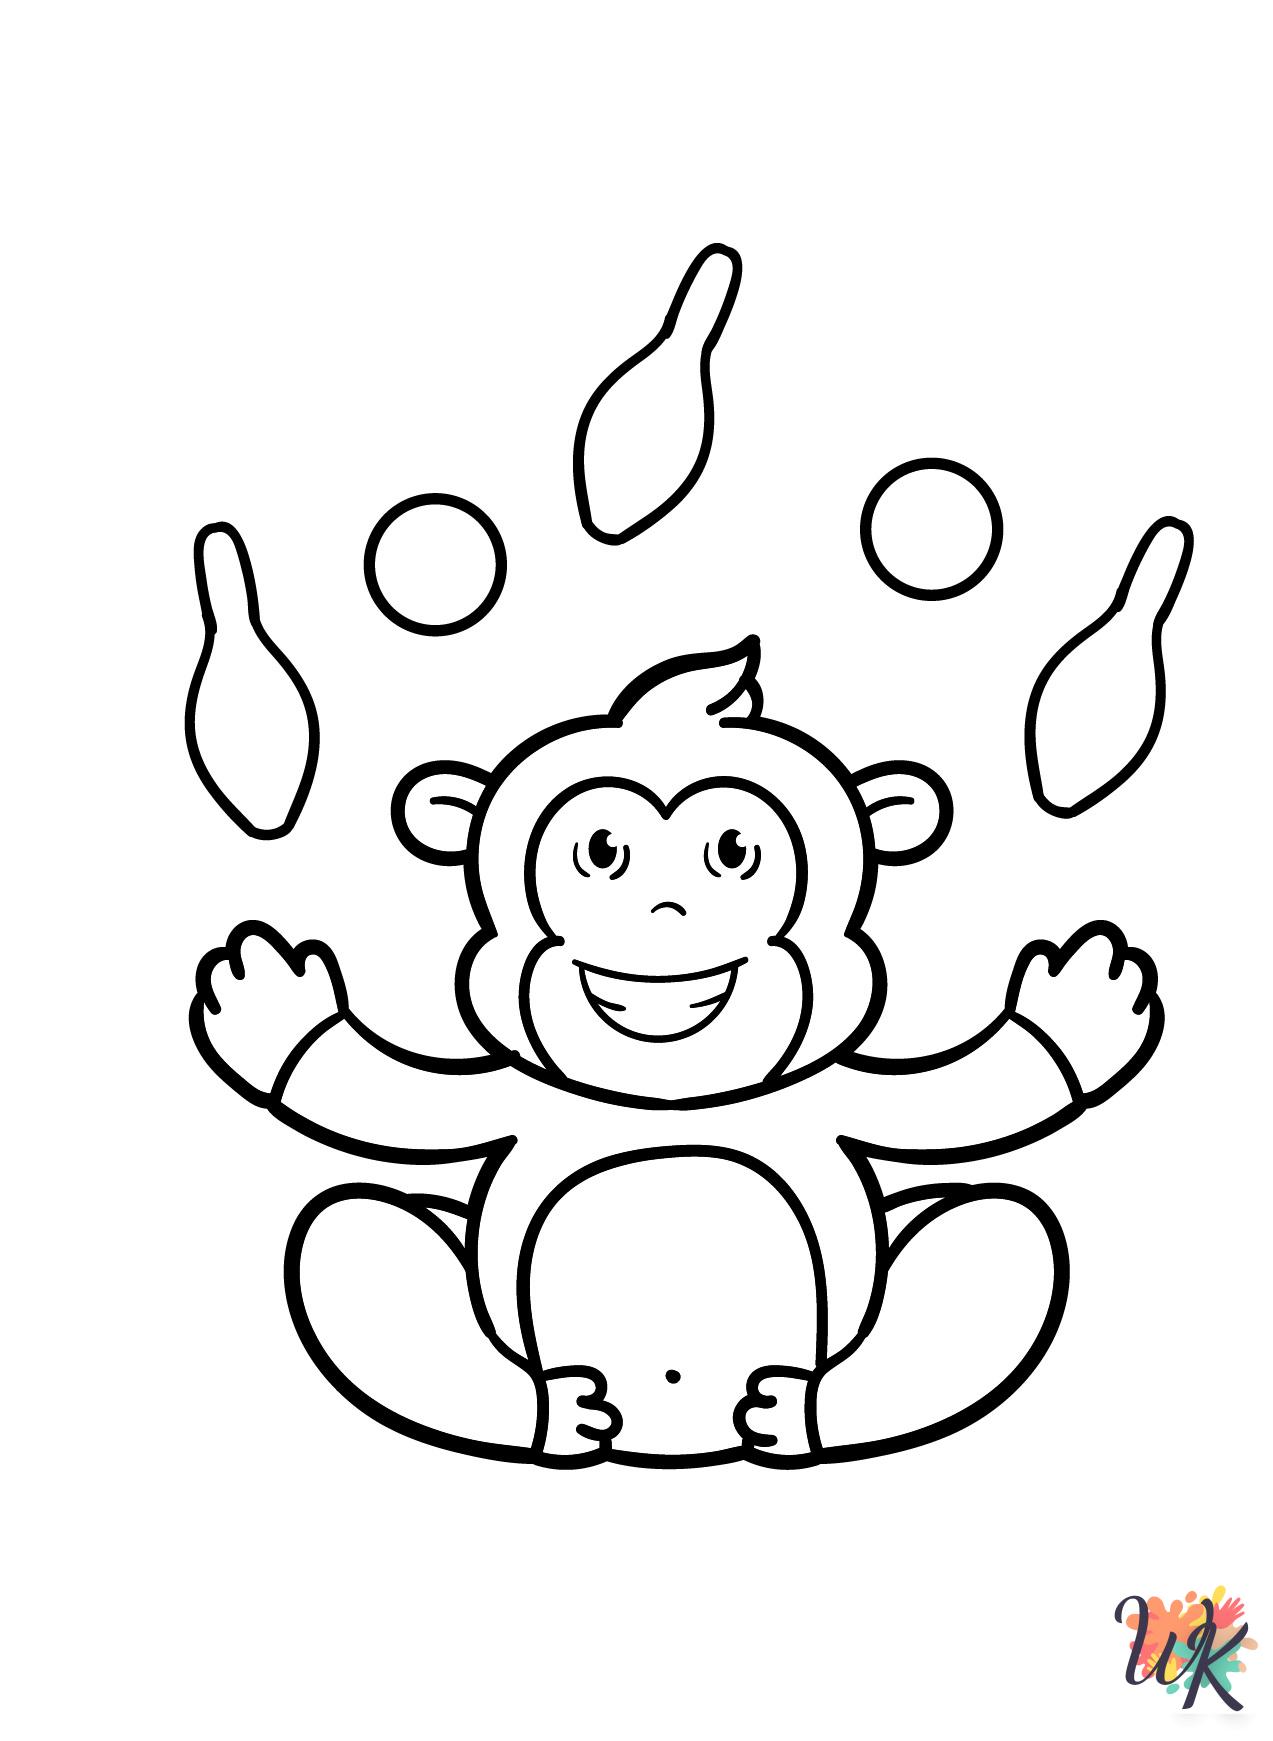 Circus coloring pages pdf